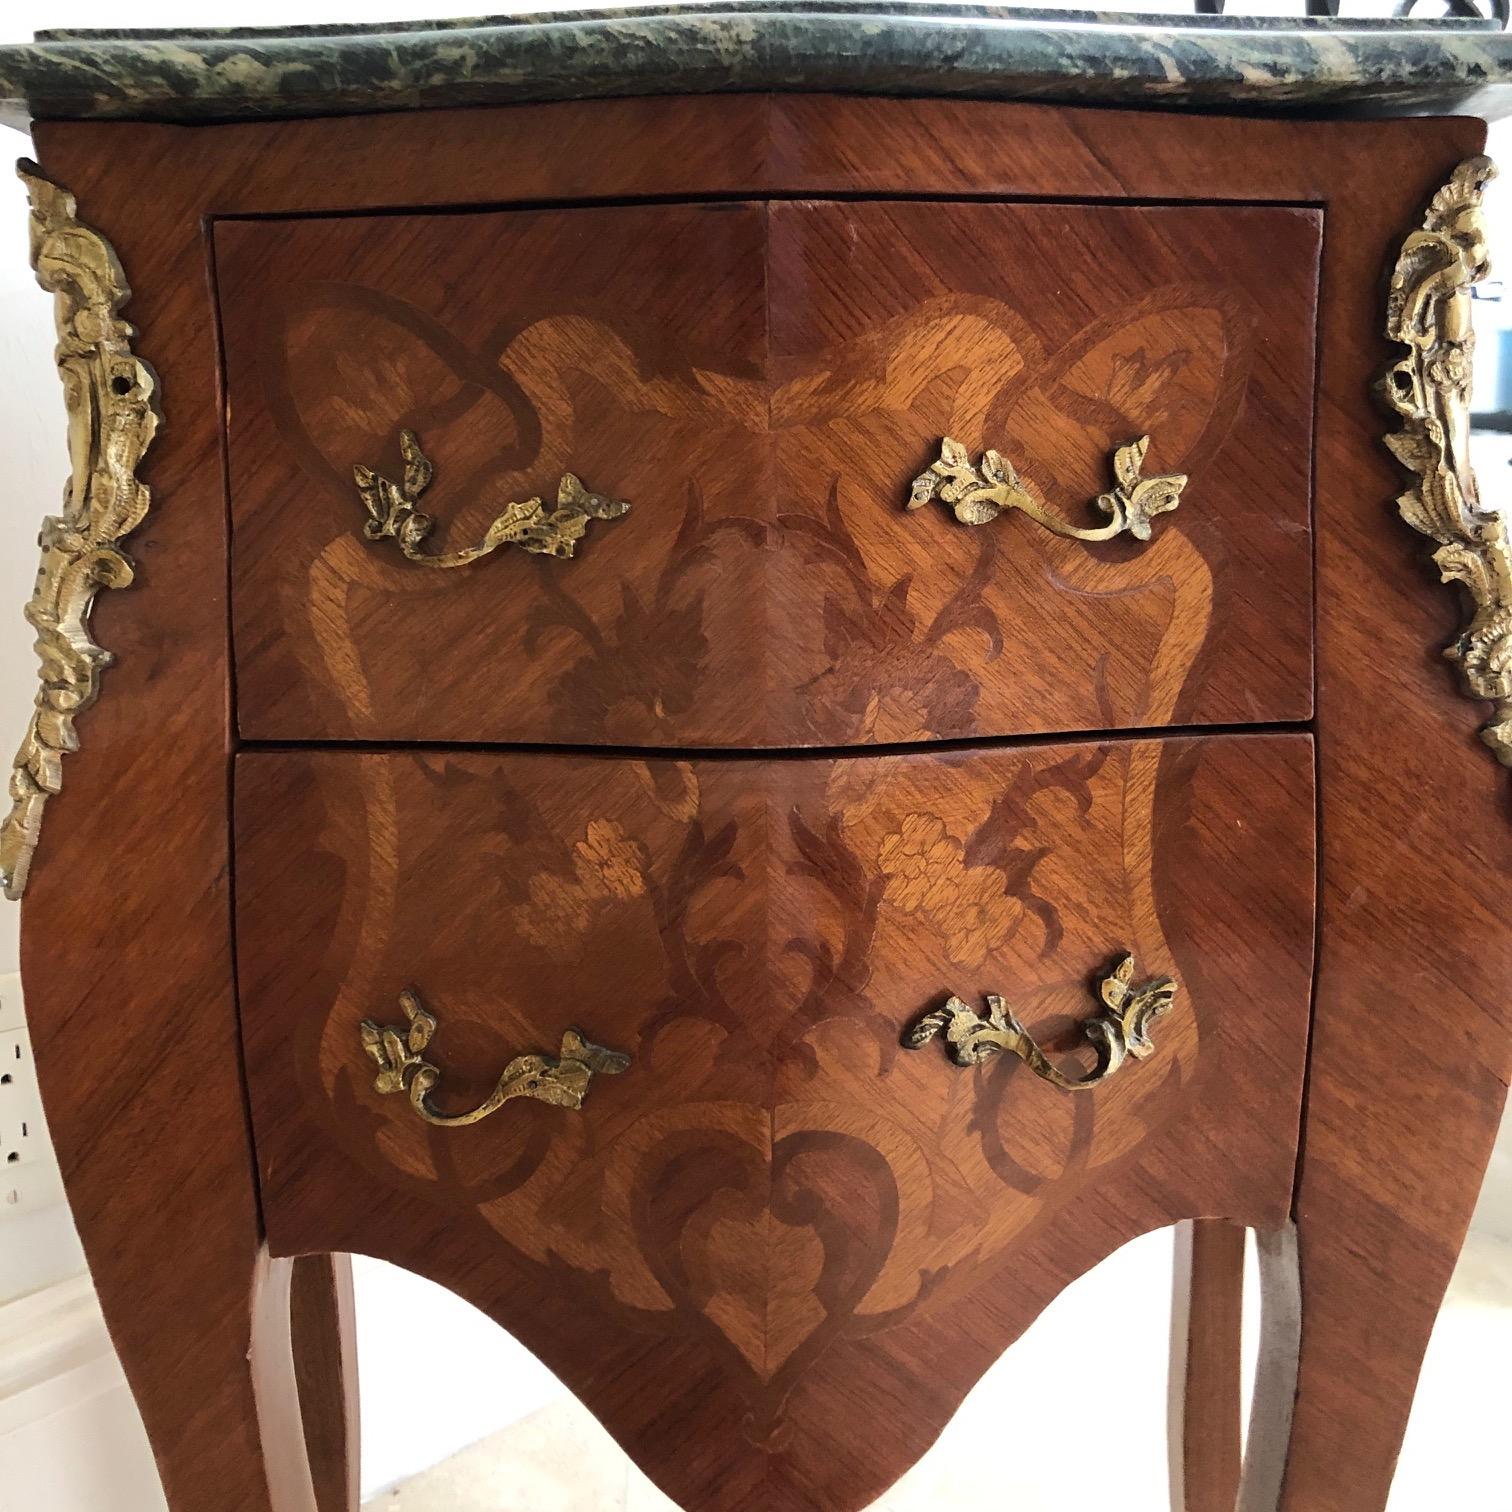 An exceptional Louis XV style mahogany nightstand or side end table commode. The
nightstand features gorgeous mahogany wood grain with inlaid marquetry and
a green beveled marble top. The nightstand offer two drawers, and the cases
rest on tall